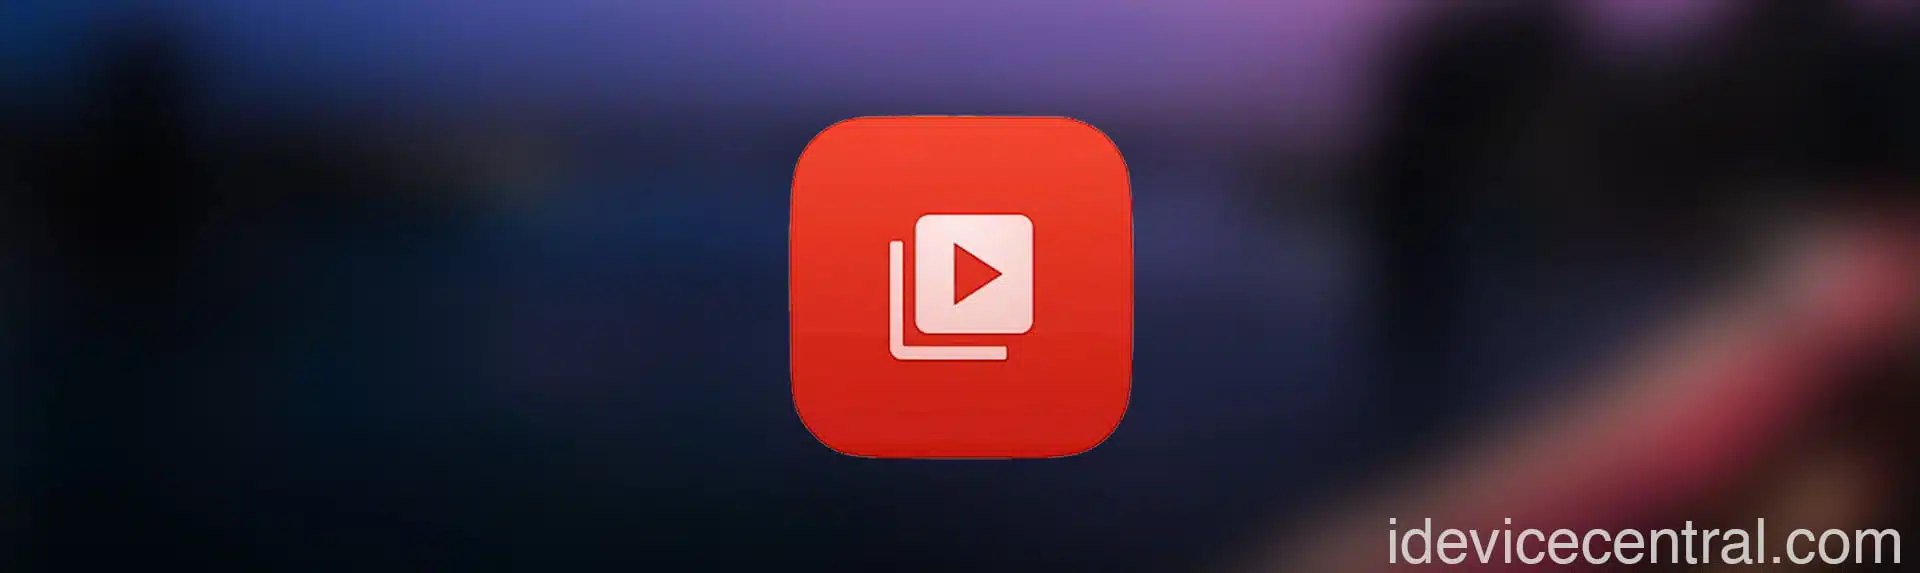 The Complete Guide to Downloading Cercube and uYou for iOS: The best Ad Block apps for YouTube on iOS